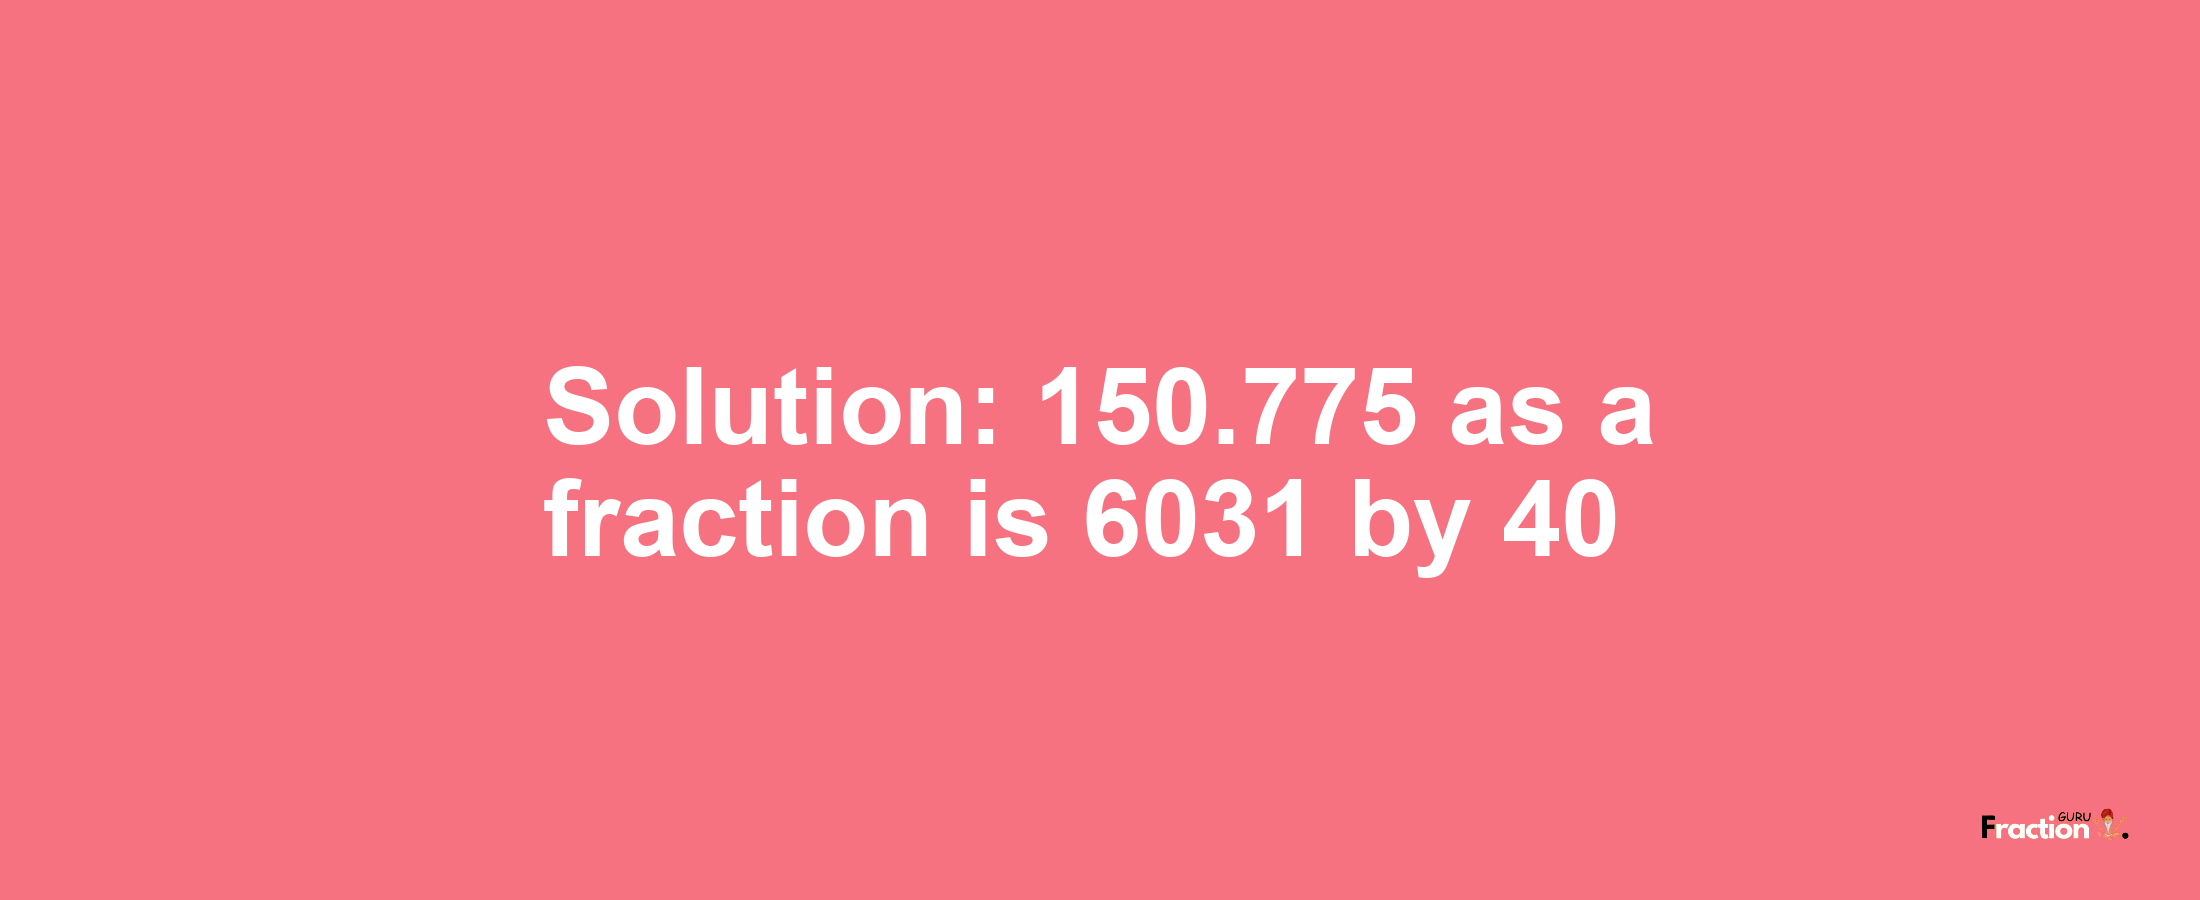 Solution:150.775 as a fraction is 6031/40